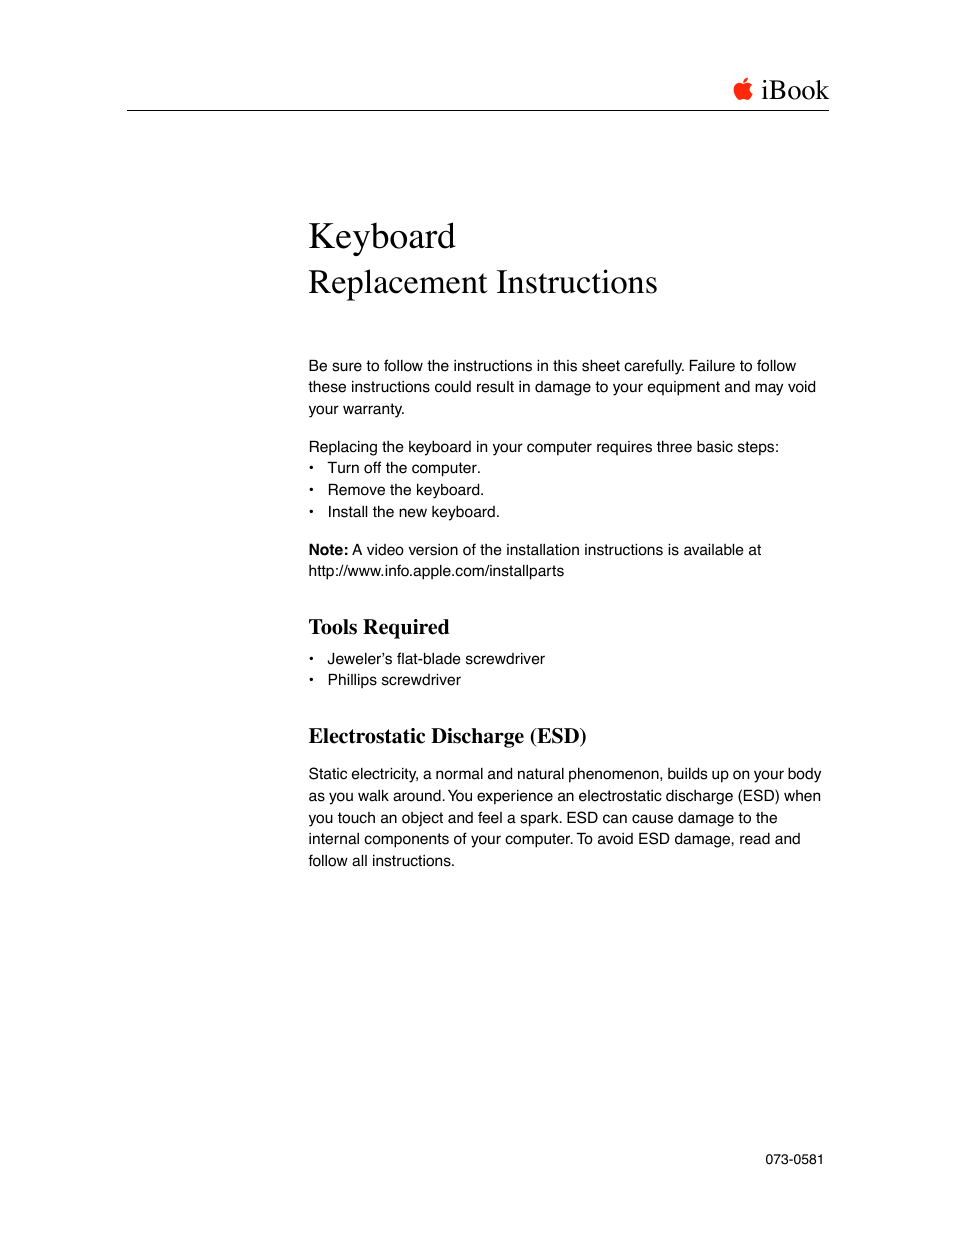 iBook (Keyboard Replacement) (Page 1)